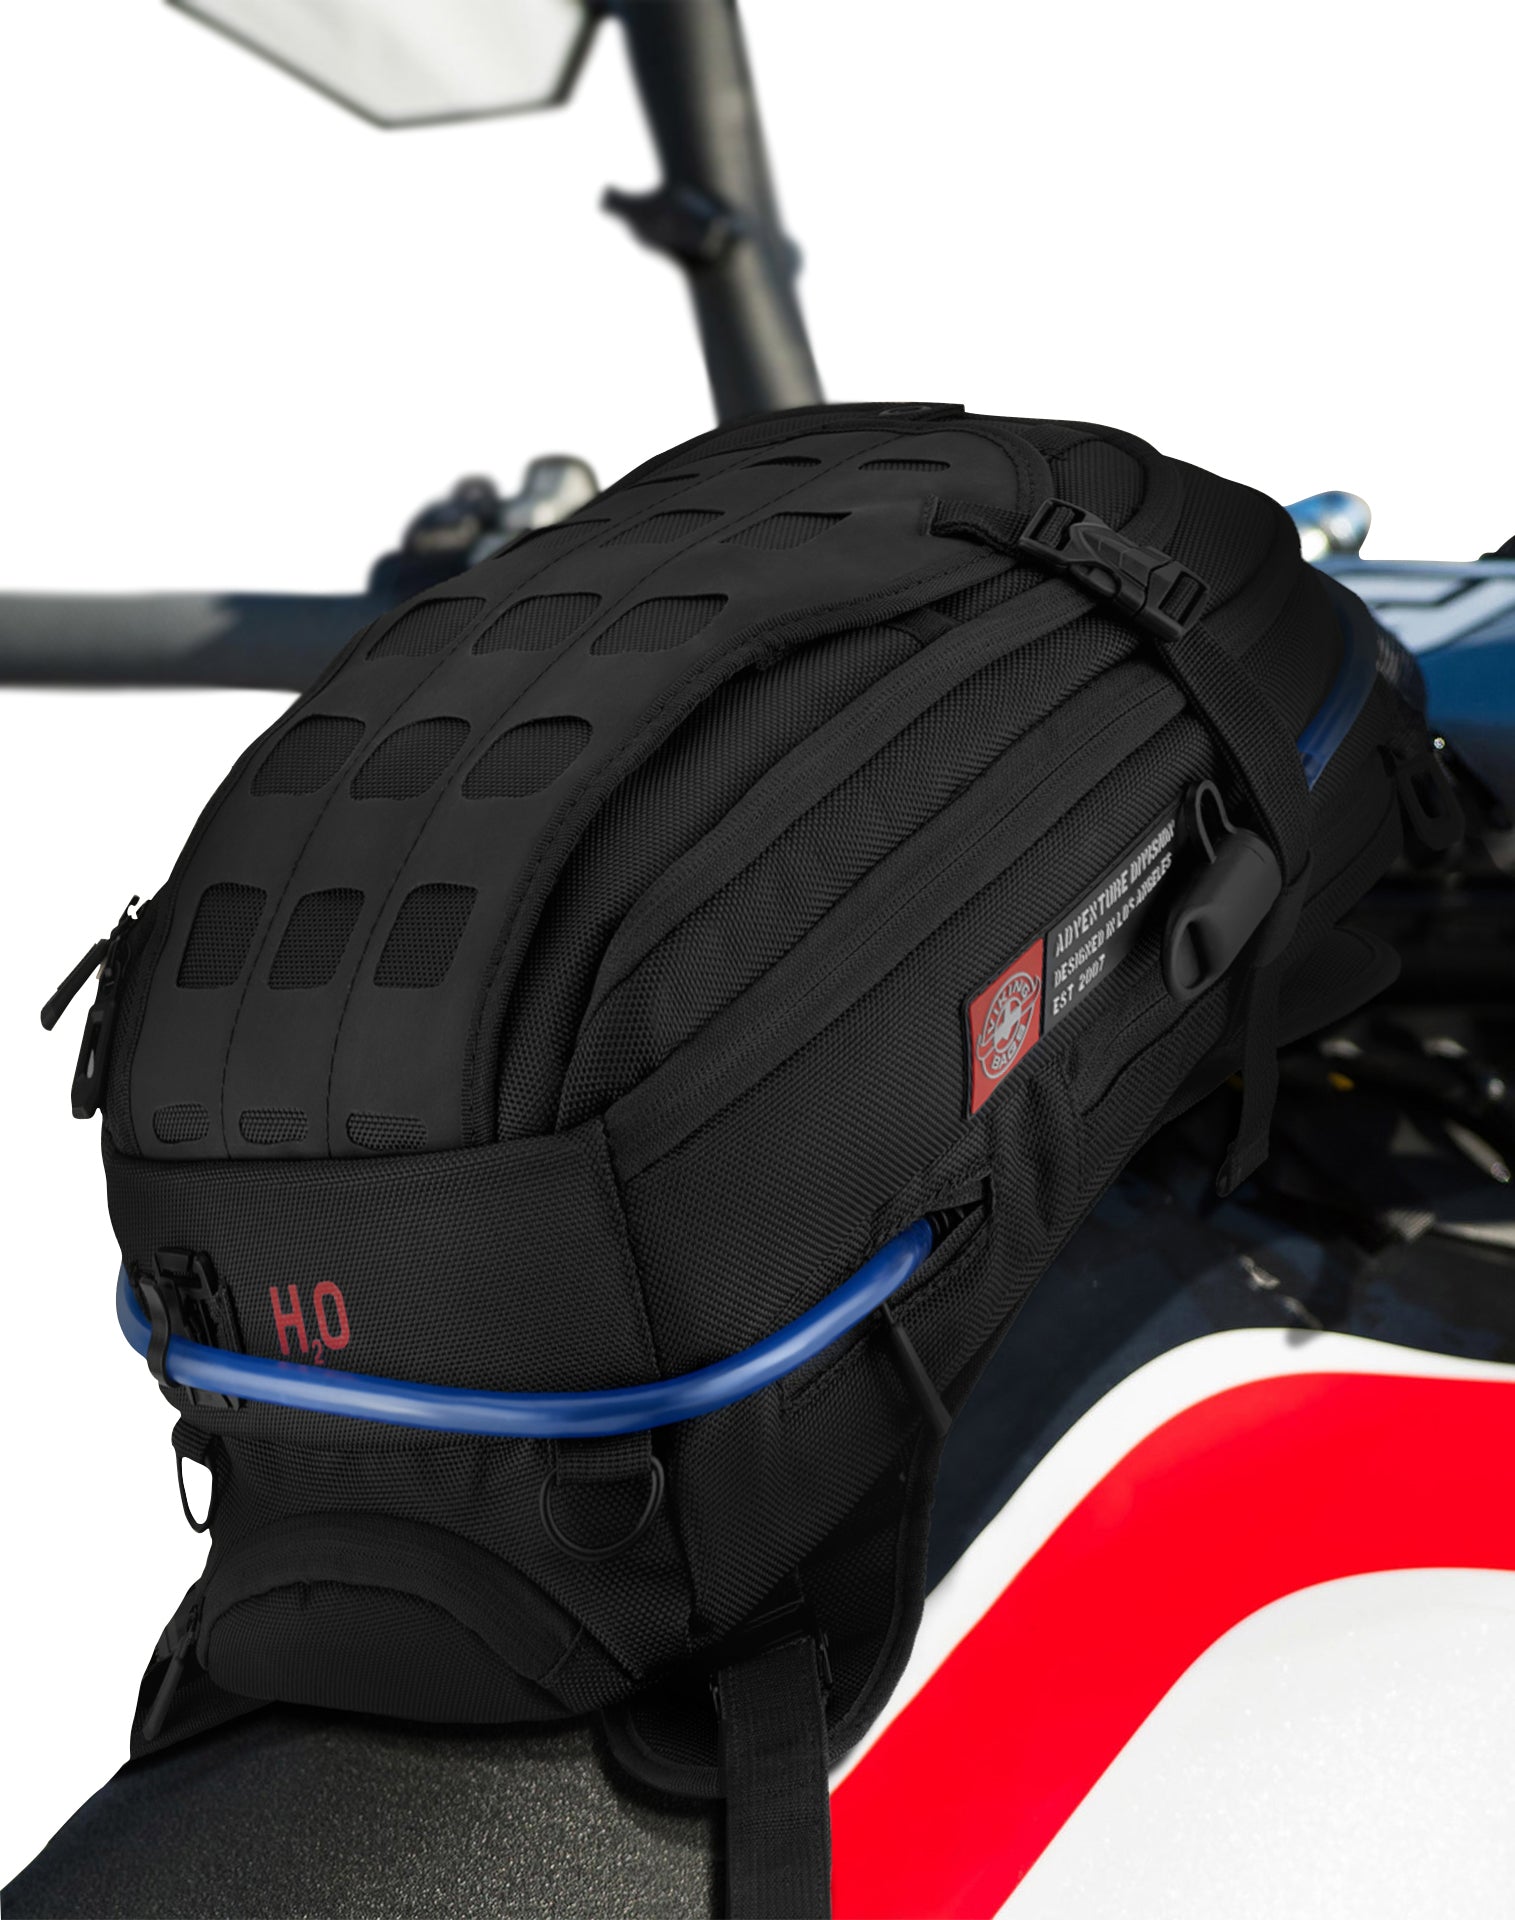 Viking Apex Triumph ADV Touring Tank Bag with Hydration Pack on Tank